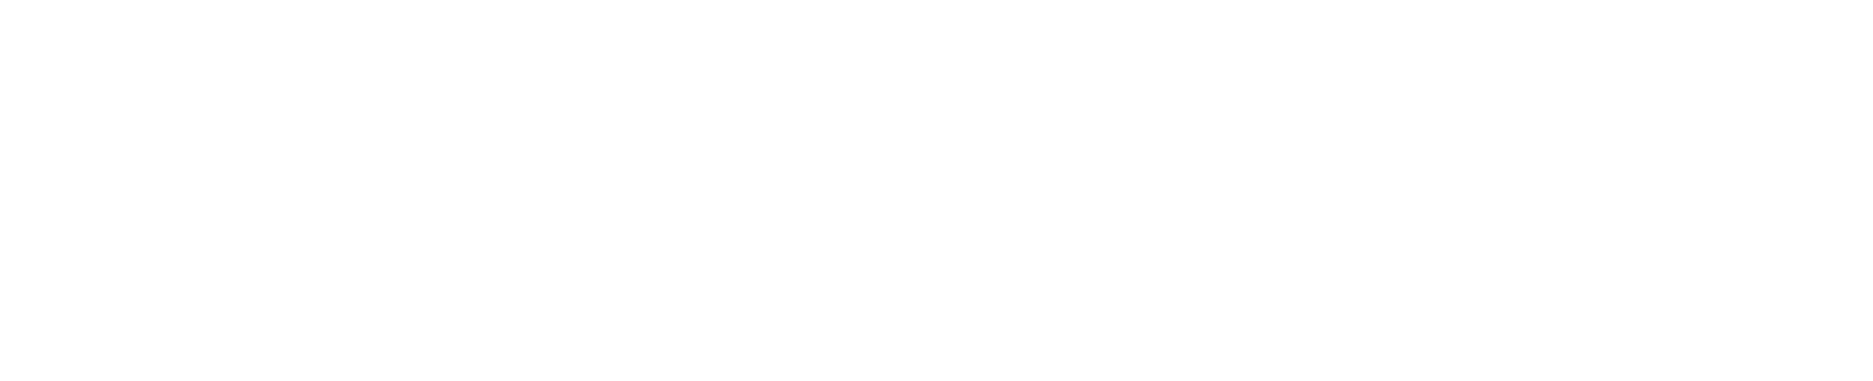 Farmers Count on G3